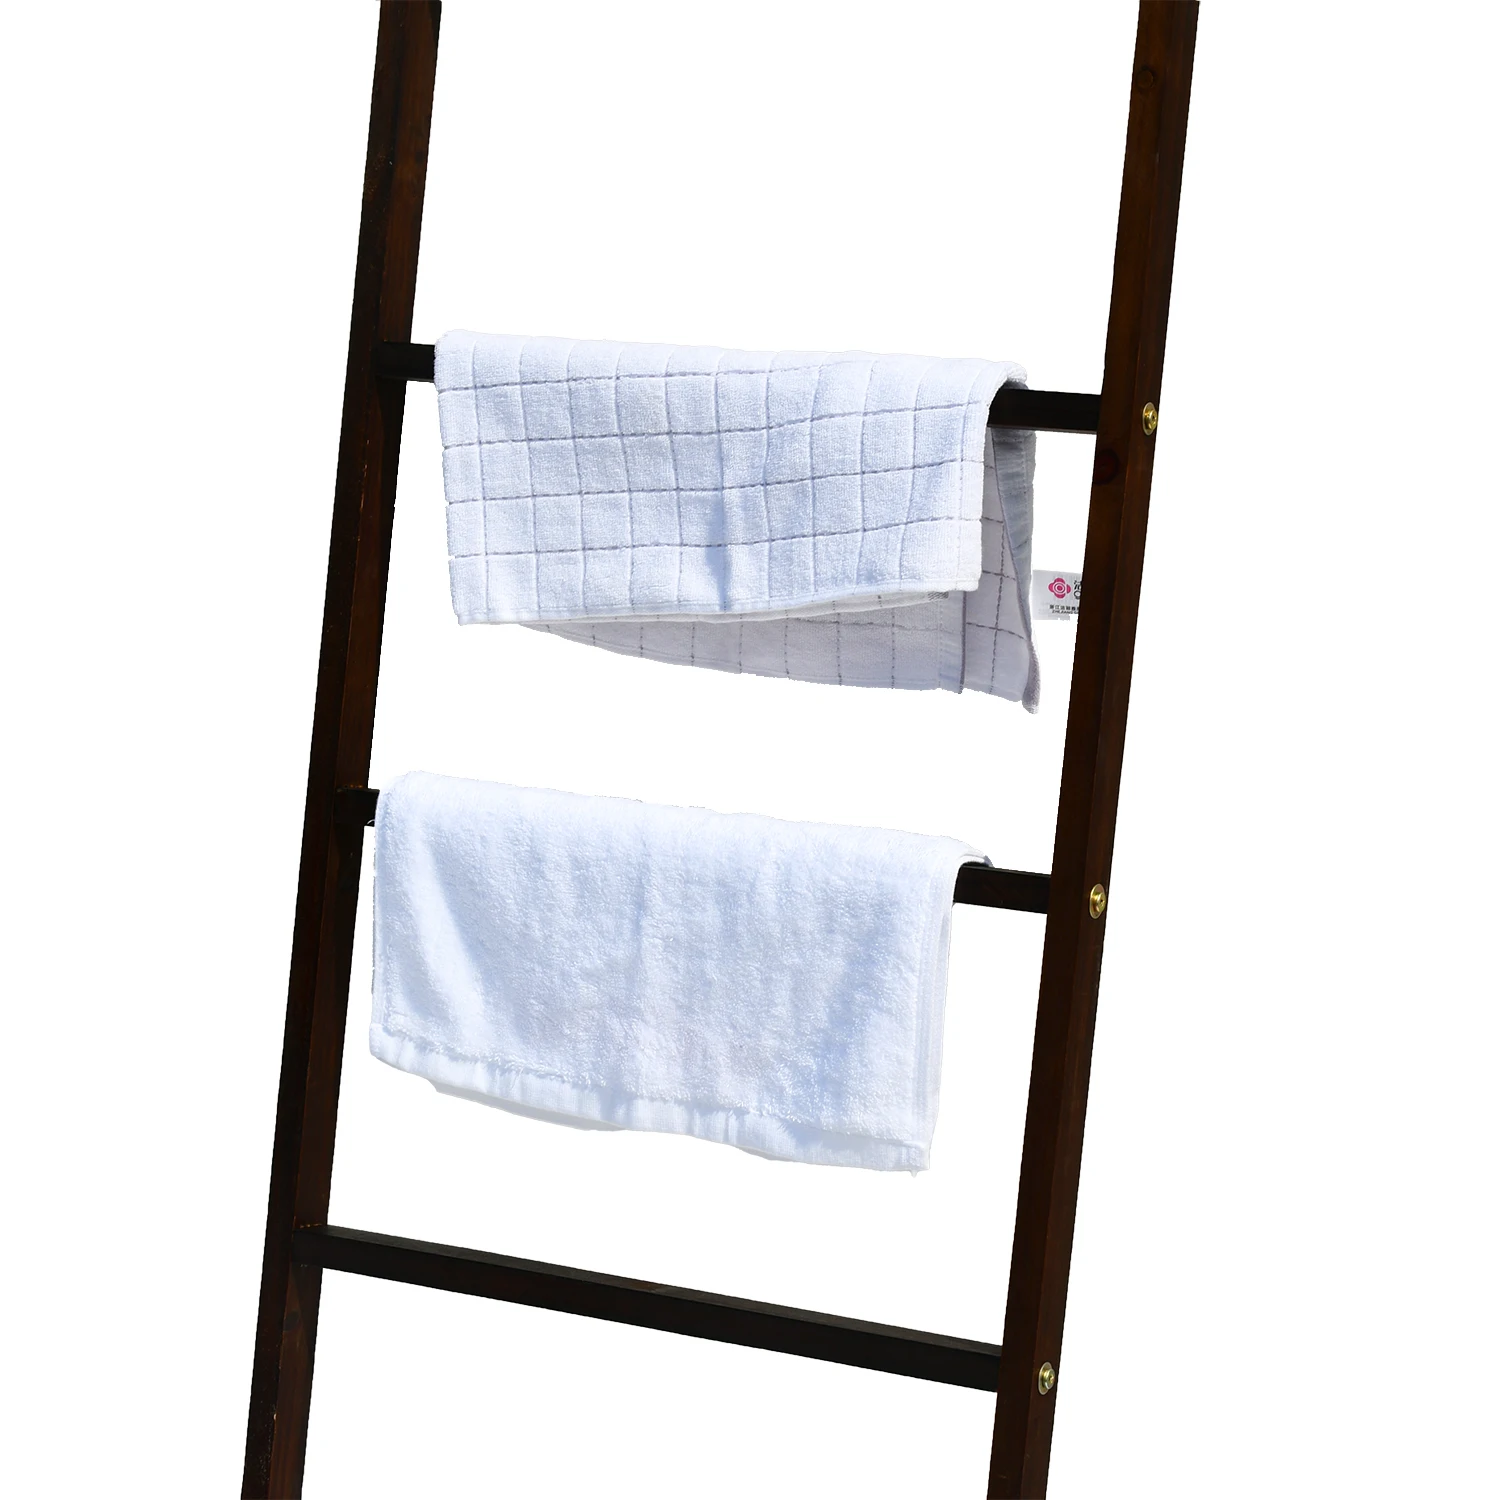 Foot Wall Leaning Blanket Ladder, Laminate Snag Free Construction (brown) Farmhouse Home Decor, Decorative Blanket, Quilt, Towel